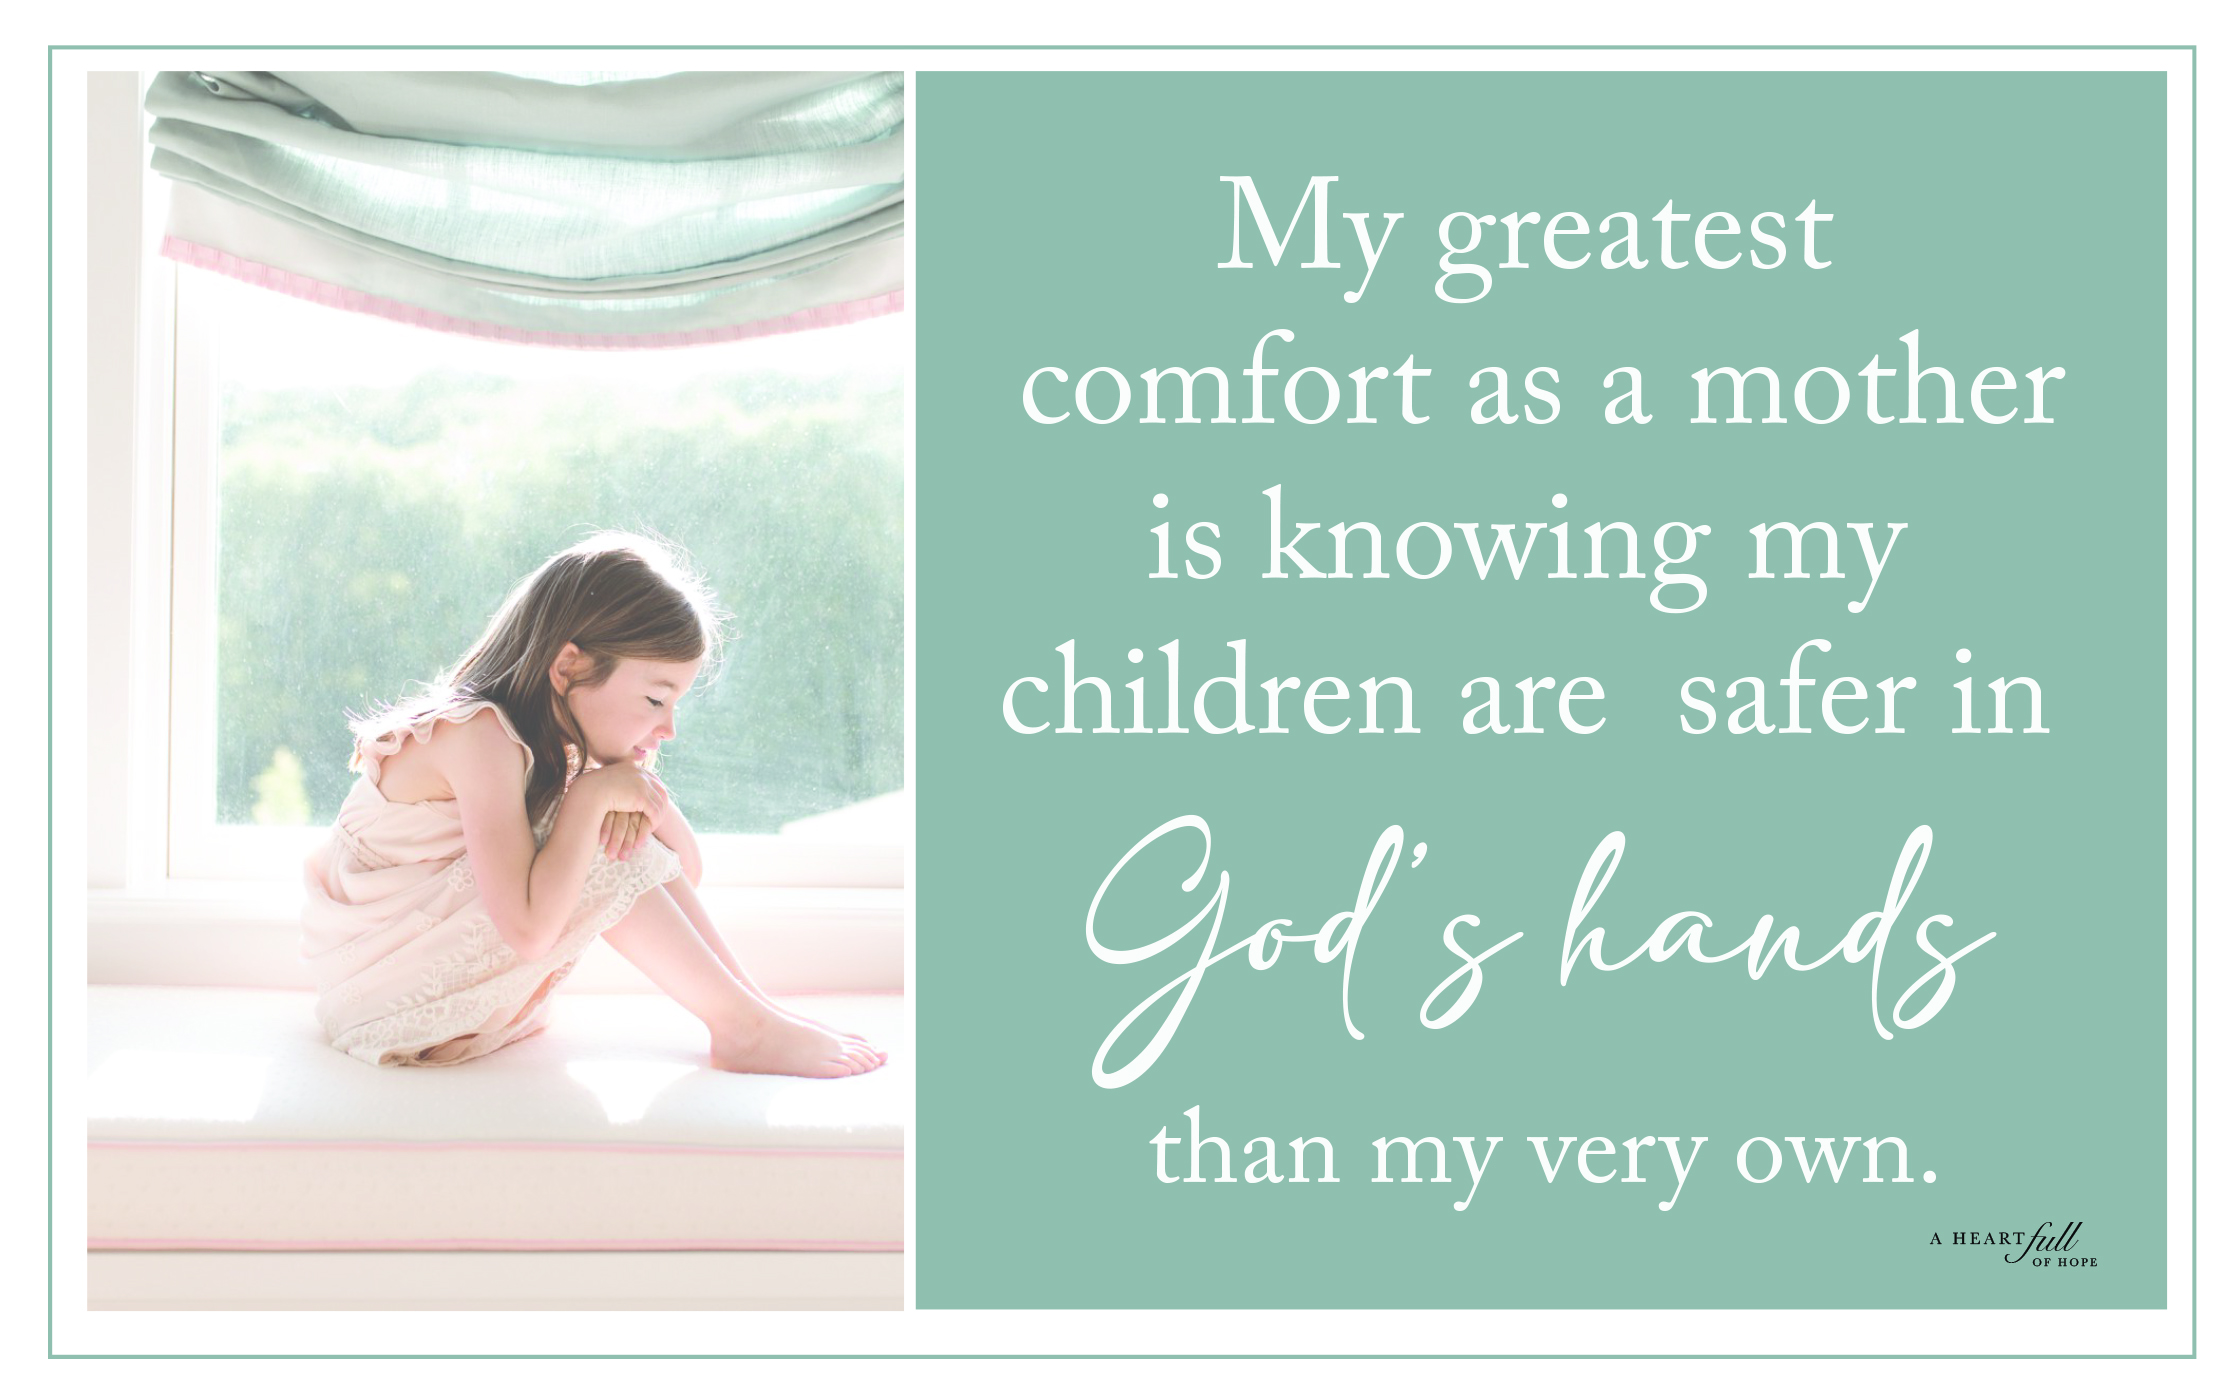 My Children Are Safer In God’s Hands Than My Very Own.